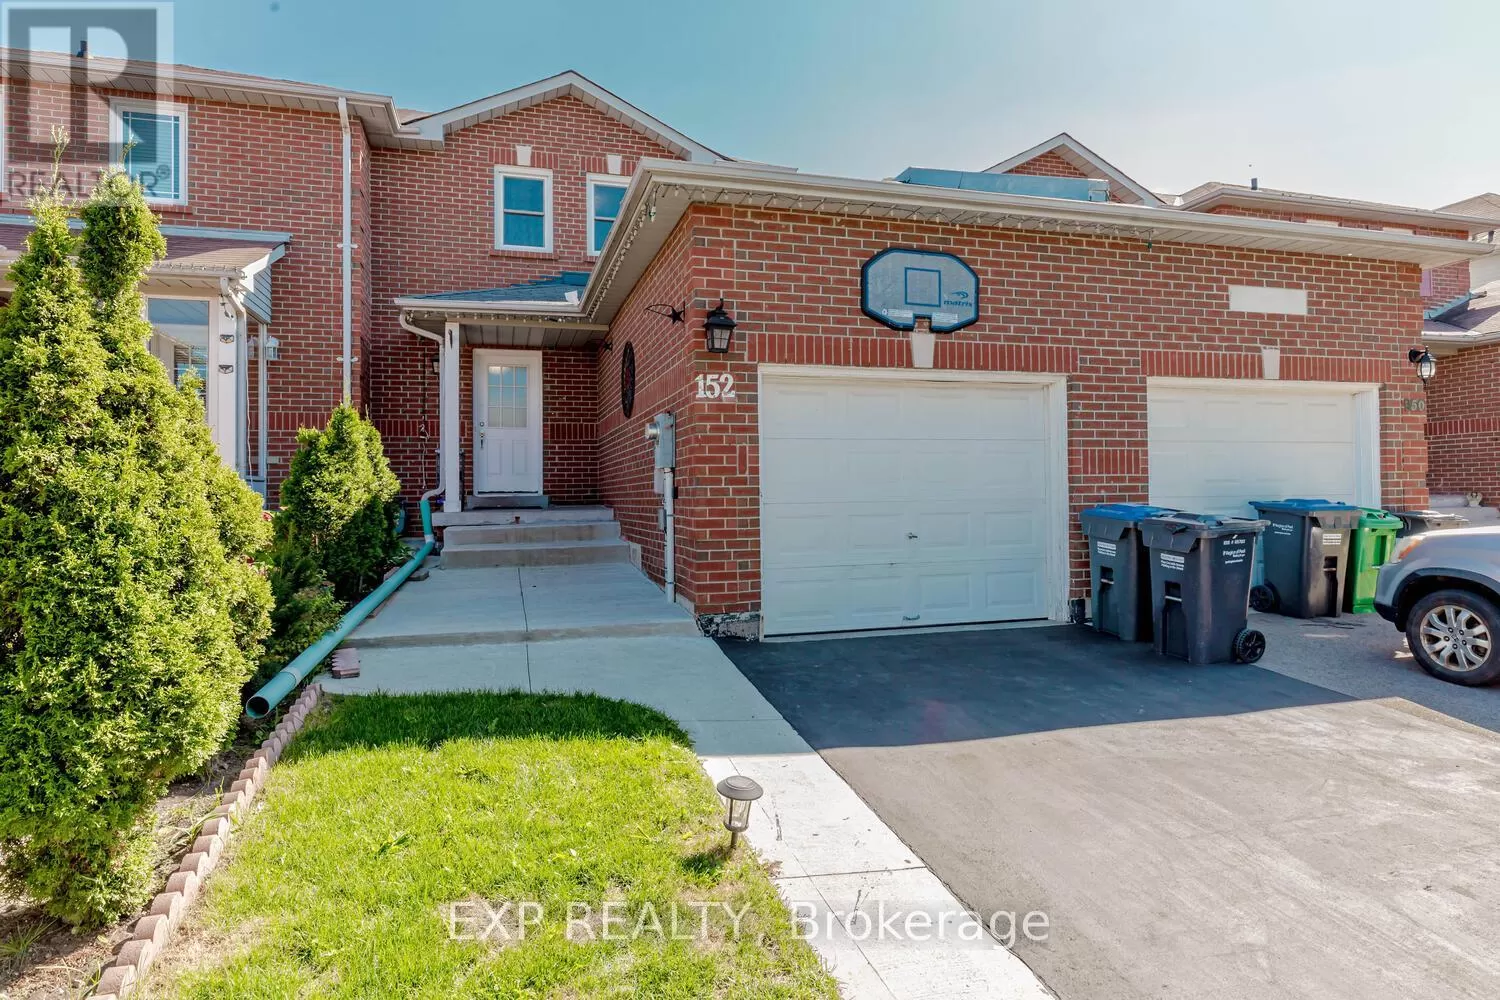 Row / Townhouse for rent: 152 Timberlane Dr N, Brampton, Ontario L6Y 4V7